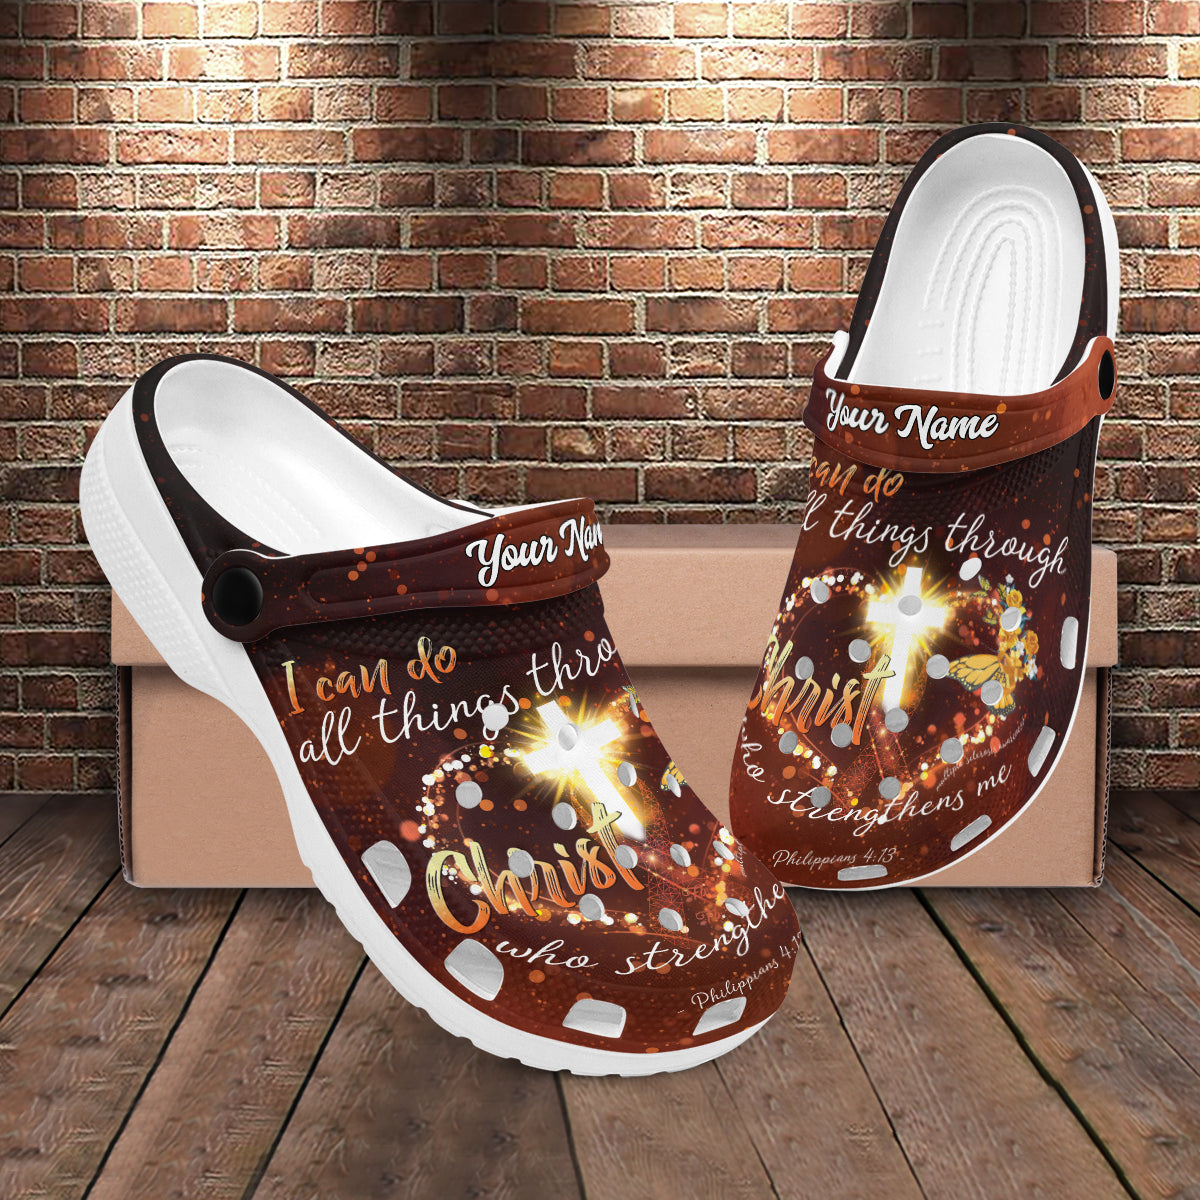 Teesdily | I Can Do All Things Through Christ Who Strengthens Me Customized Clogs Shoes, Catholic Christian Gifts, God Faith Believers, Kid & Adult Unisex Clogs Shoes Eva